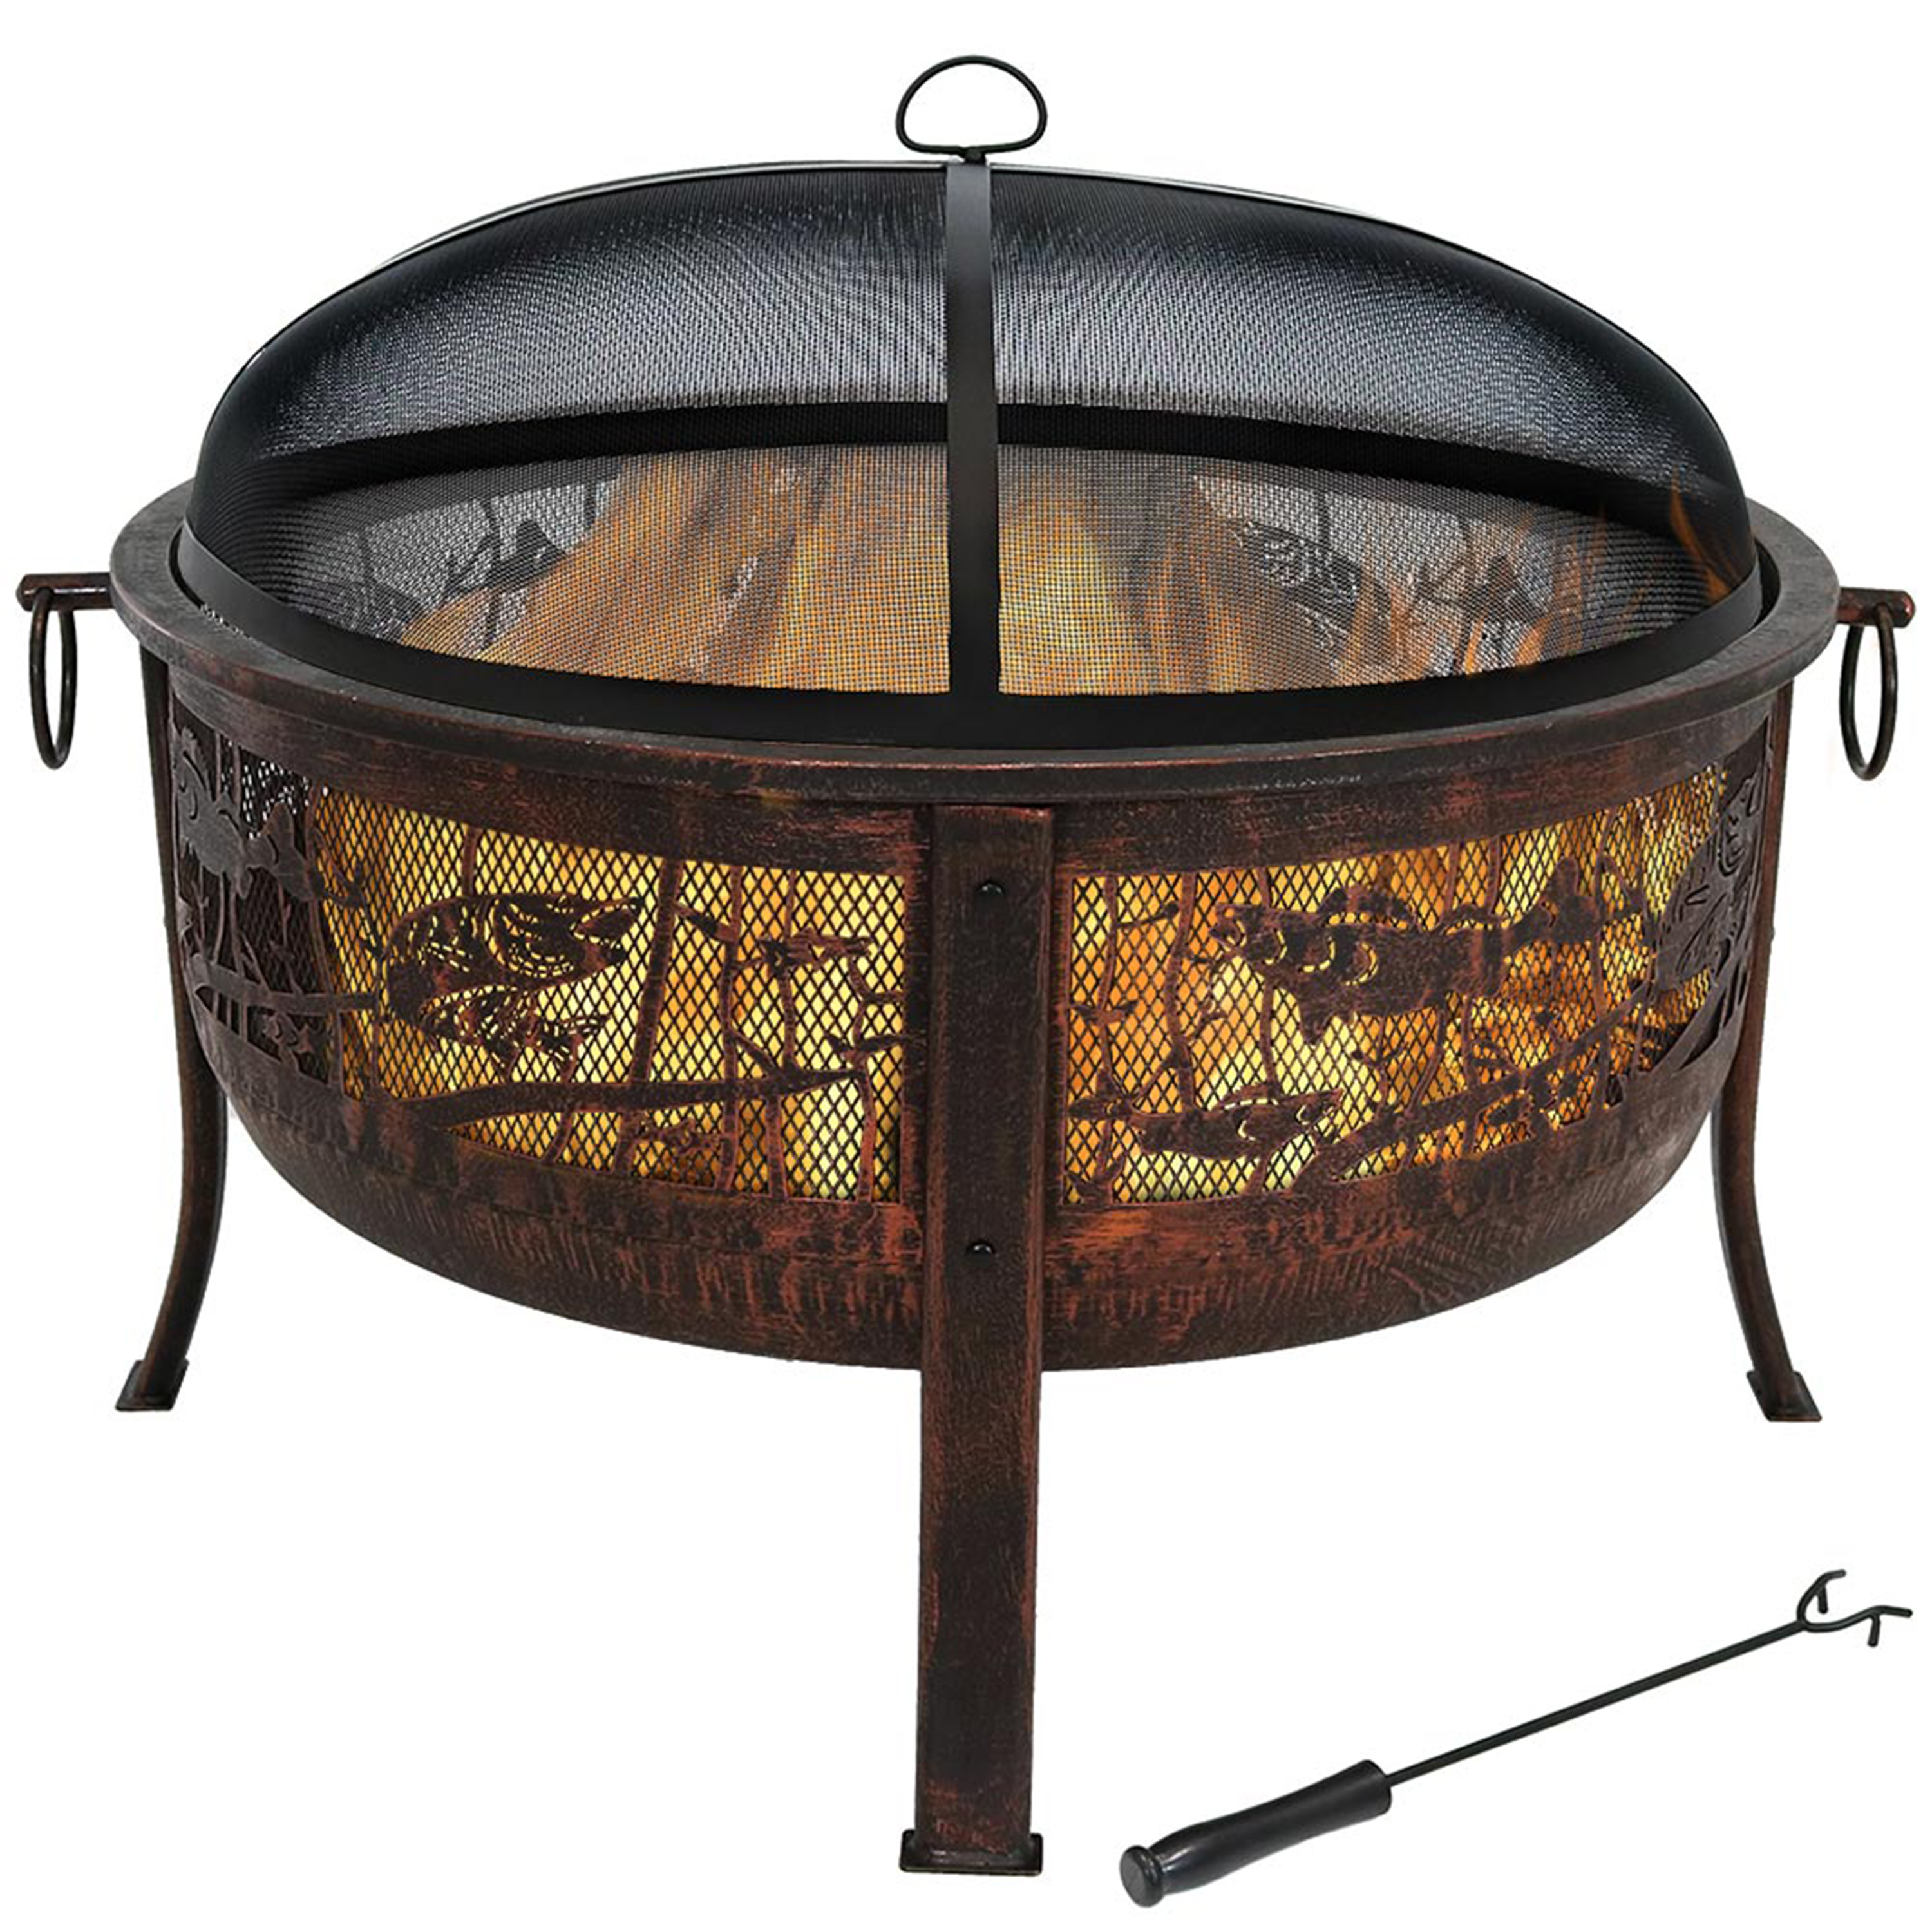 Sunnydaze Northwoods Fishing Fire Pit with Spark Screen - 30-Inch